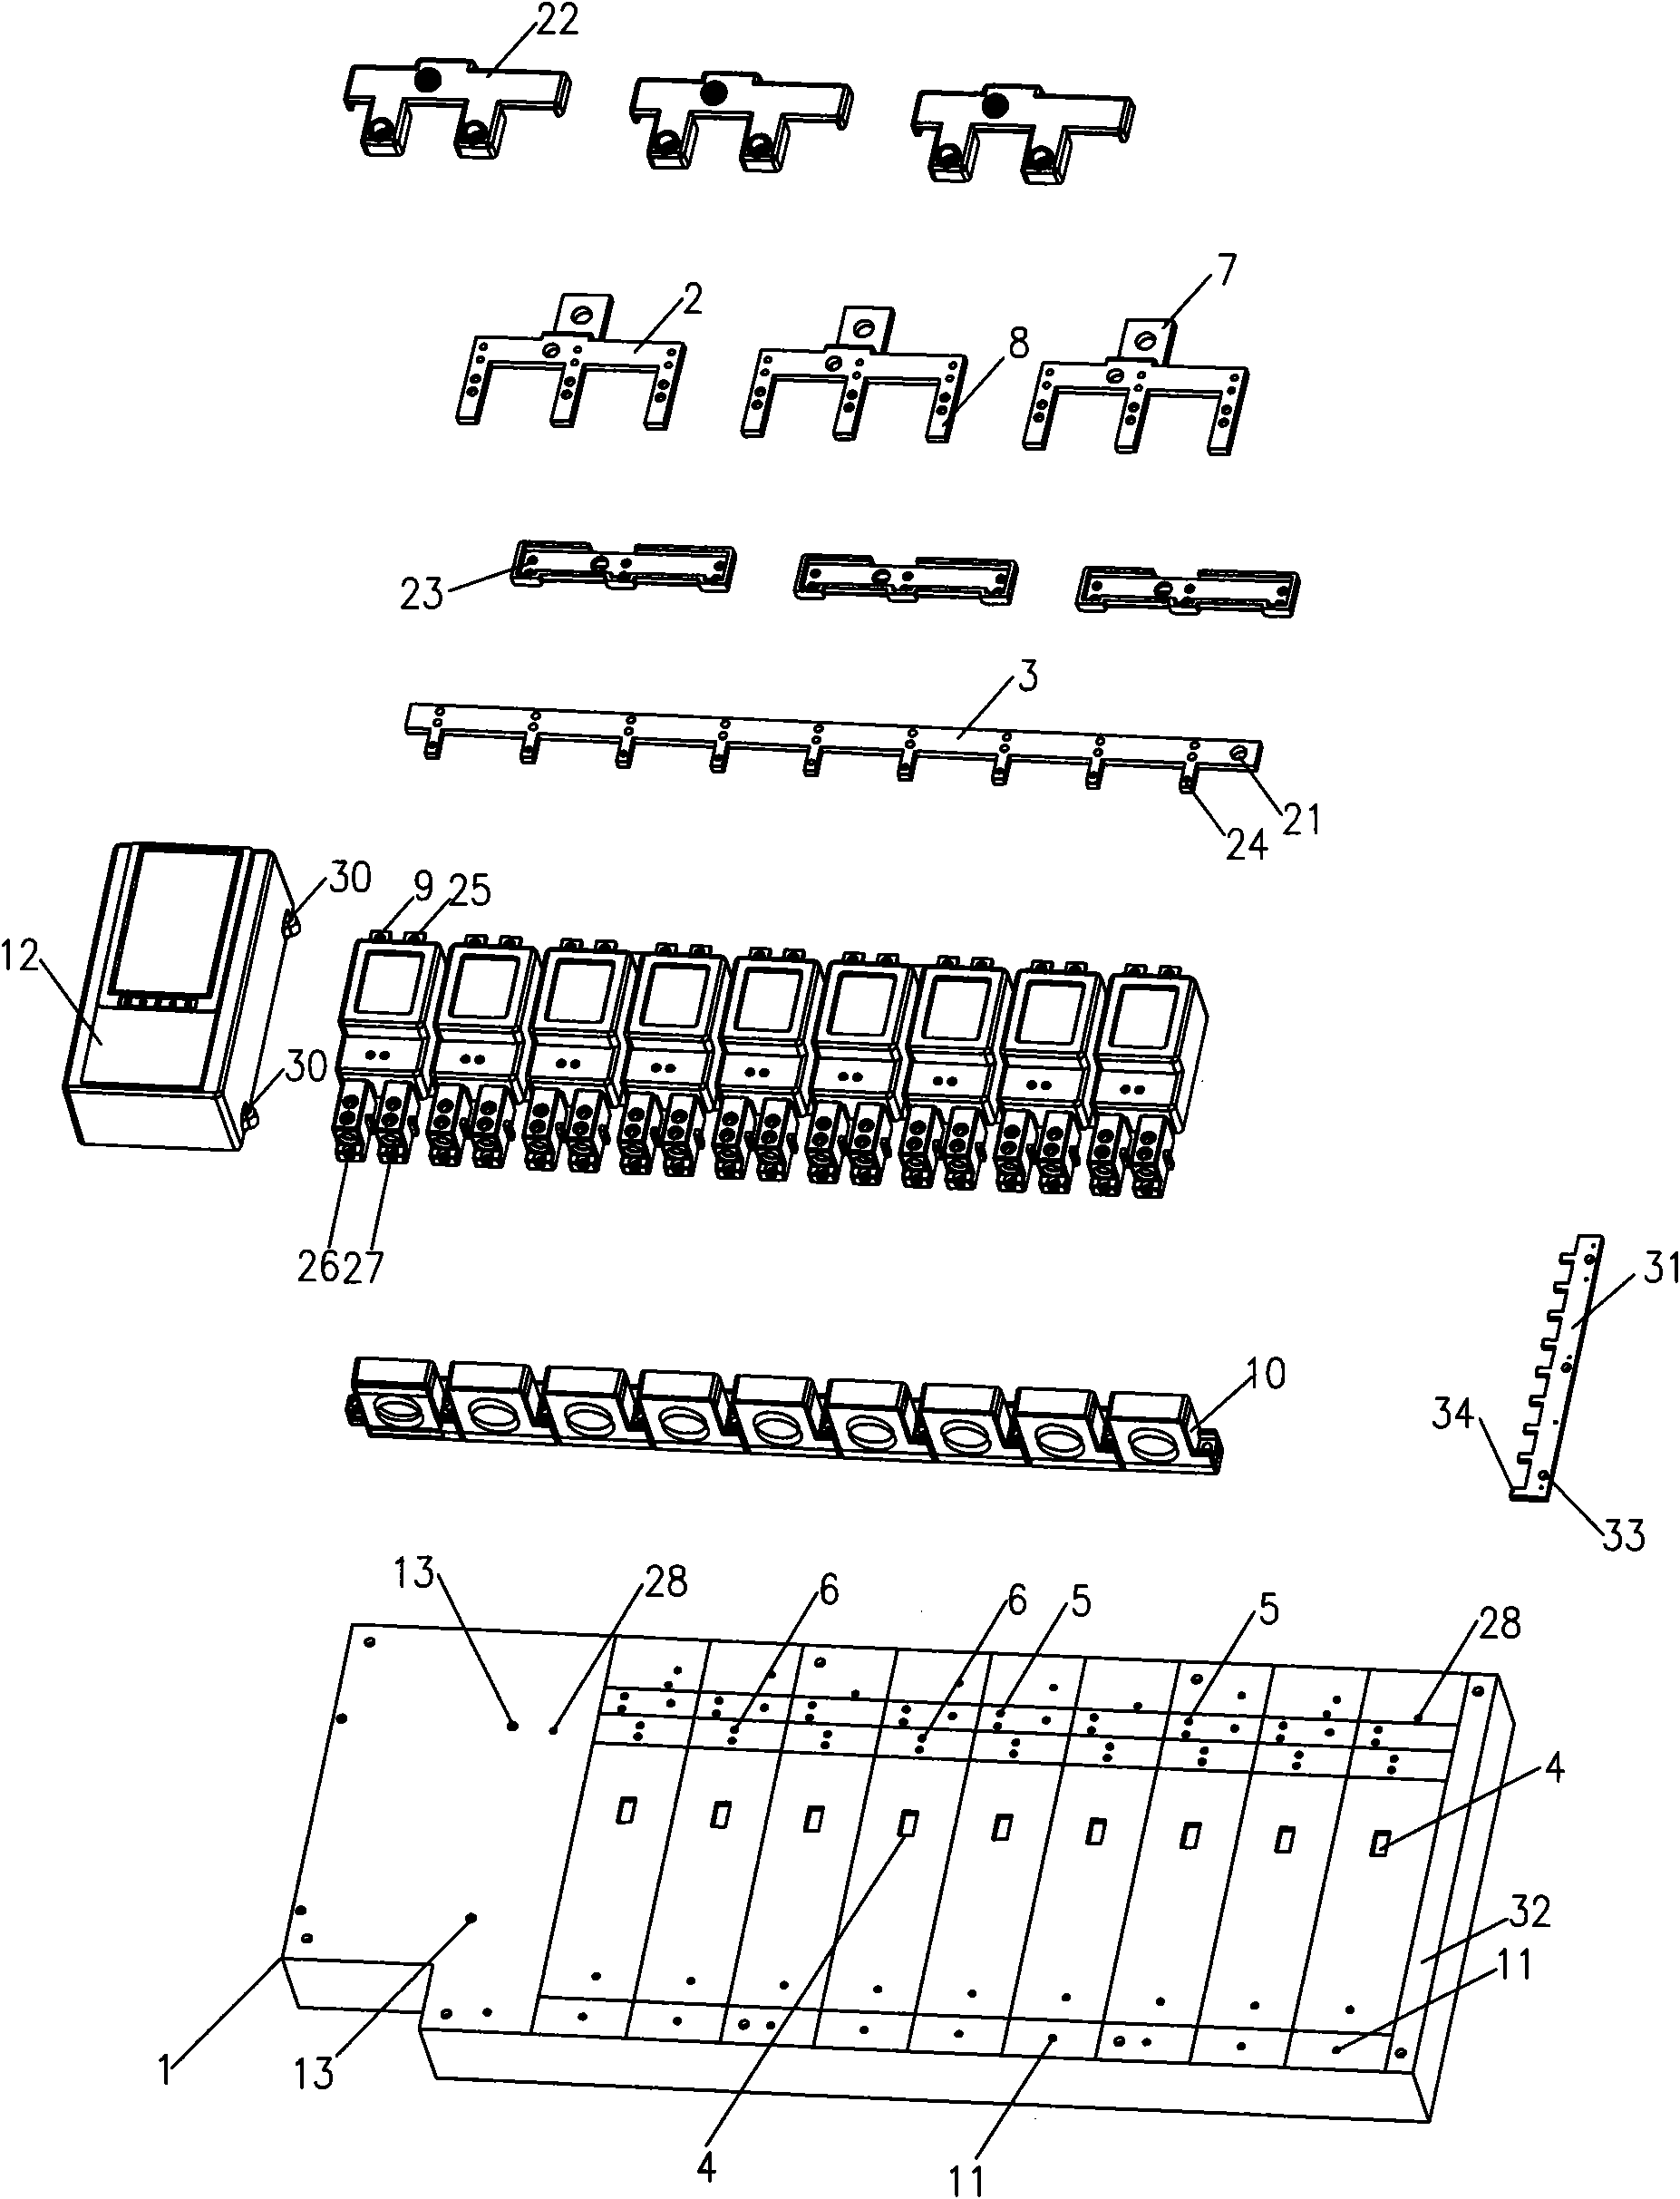 Electric energy metering assembly structure